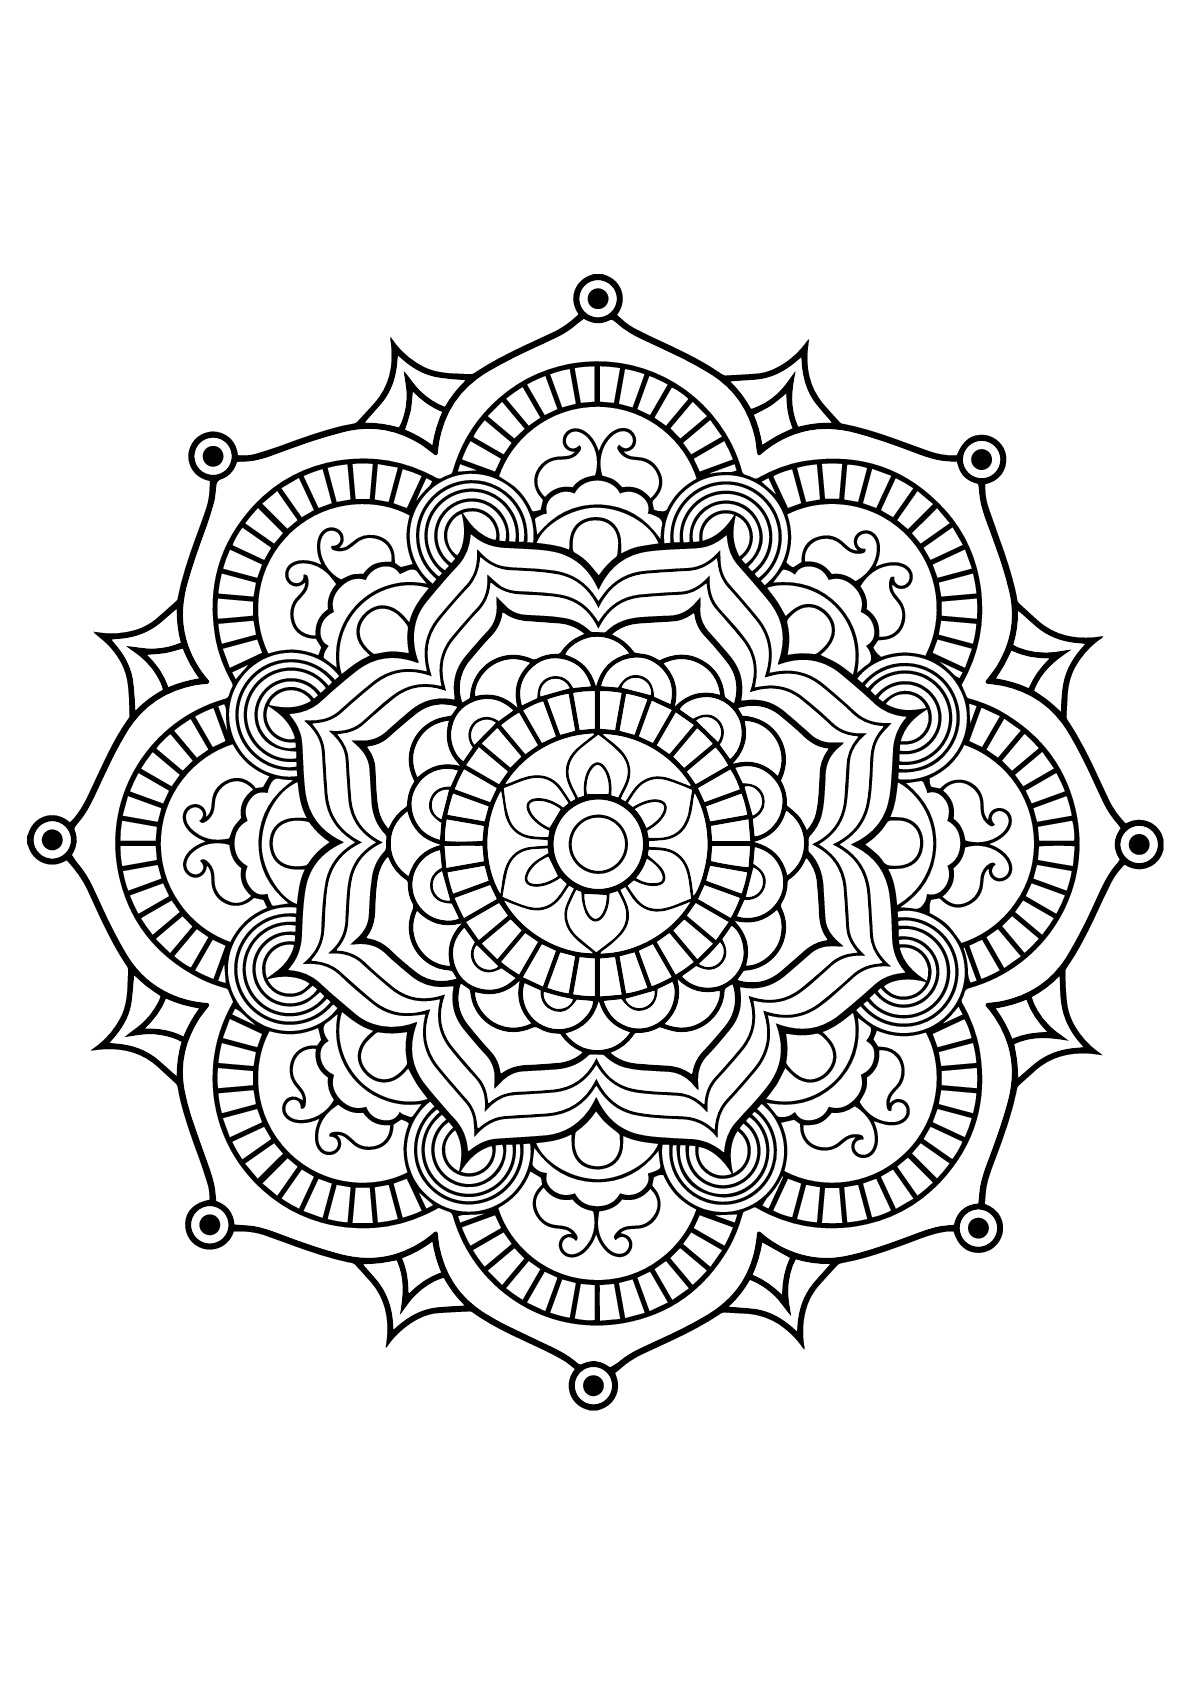 Mandala with vegetal patterns from Free Coloring book for adults